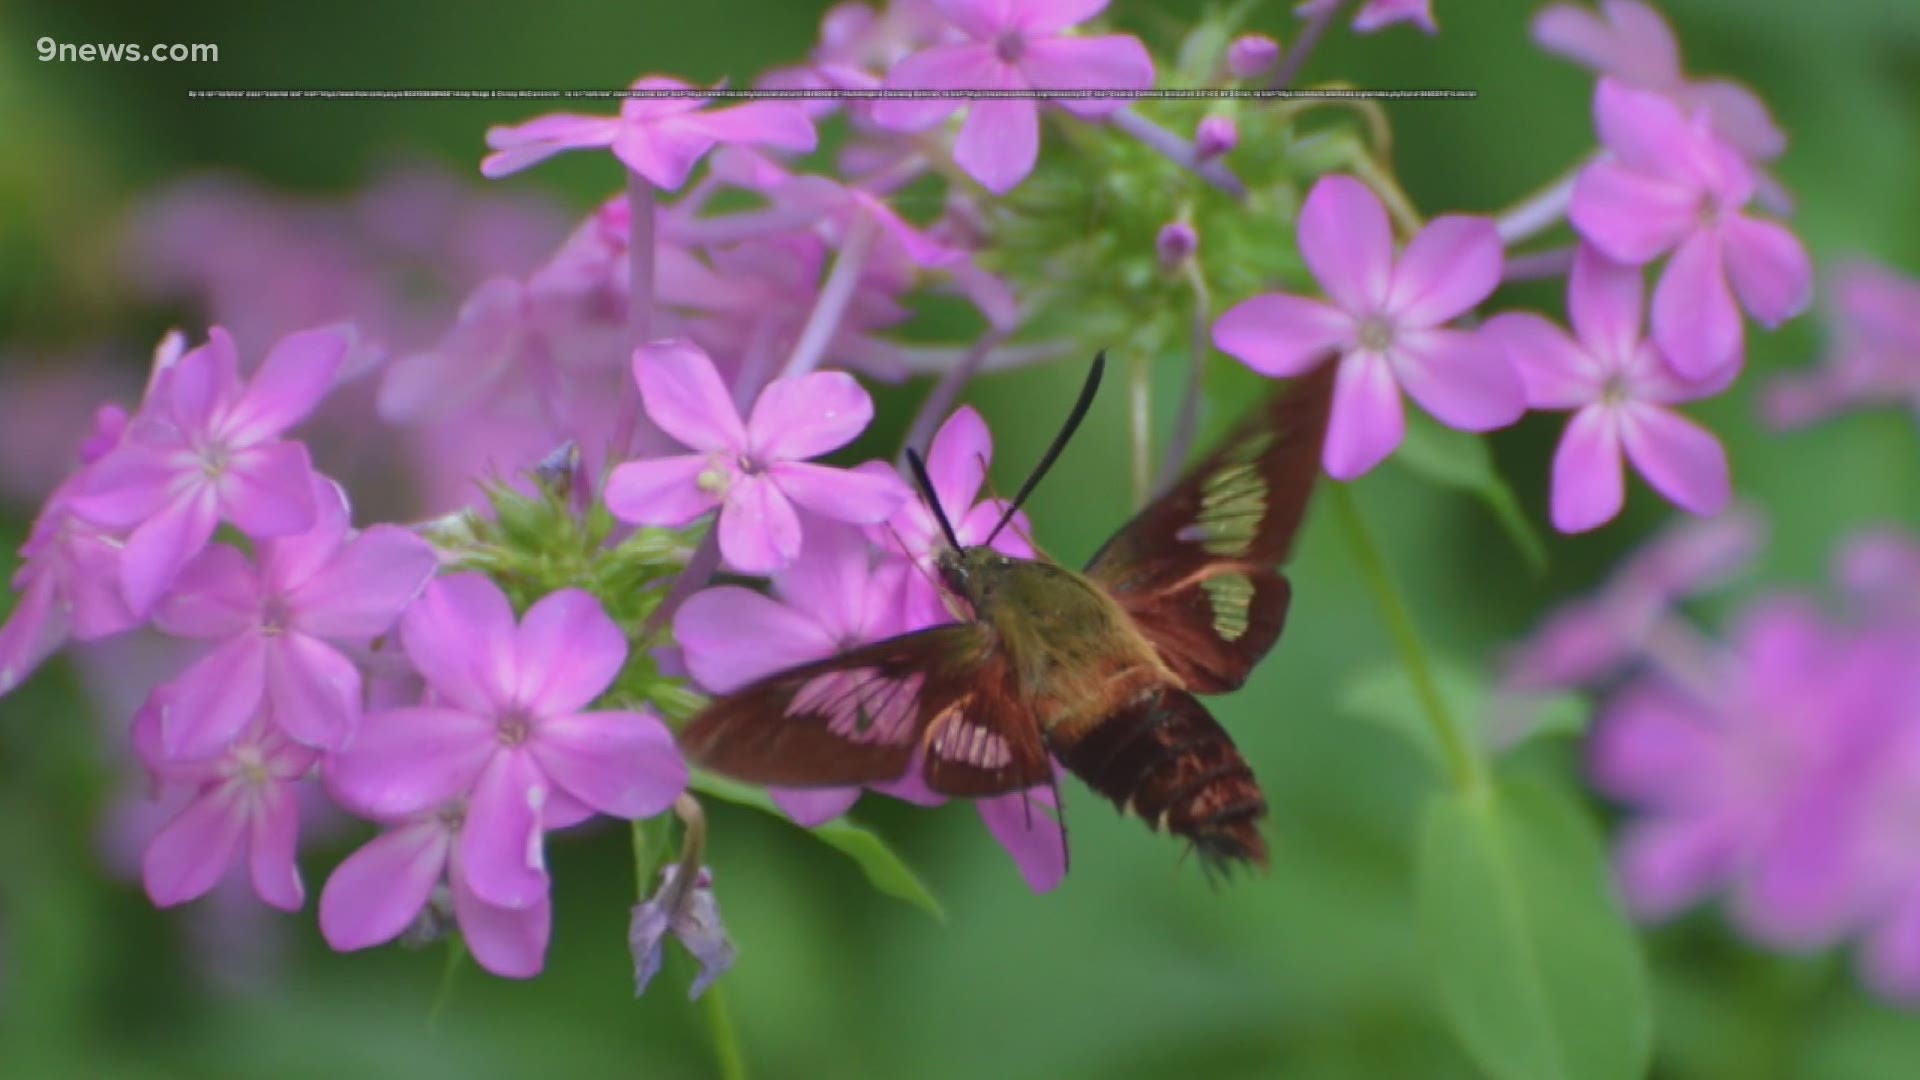 The hummingbird moth has strong wings and is about 1-2 inches smaller than a regular hummingbird.